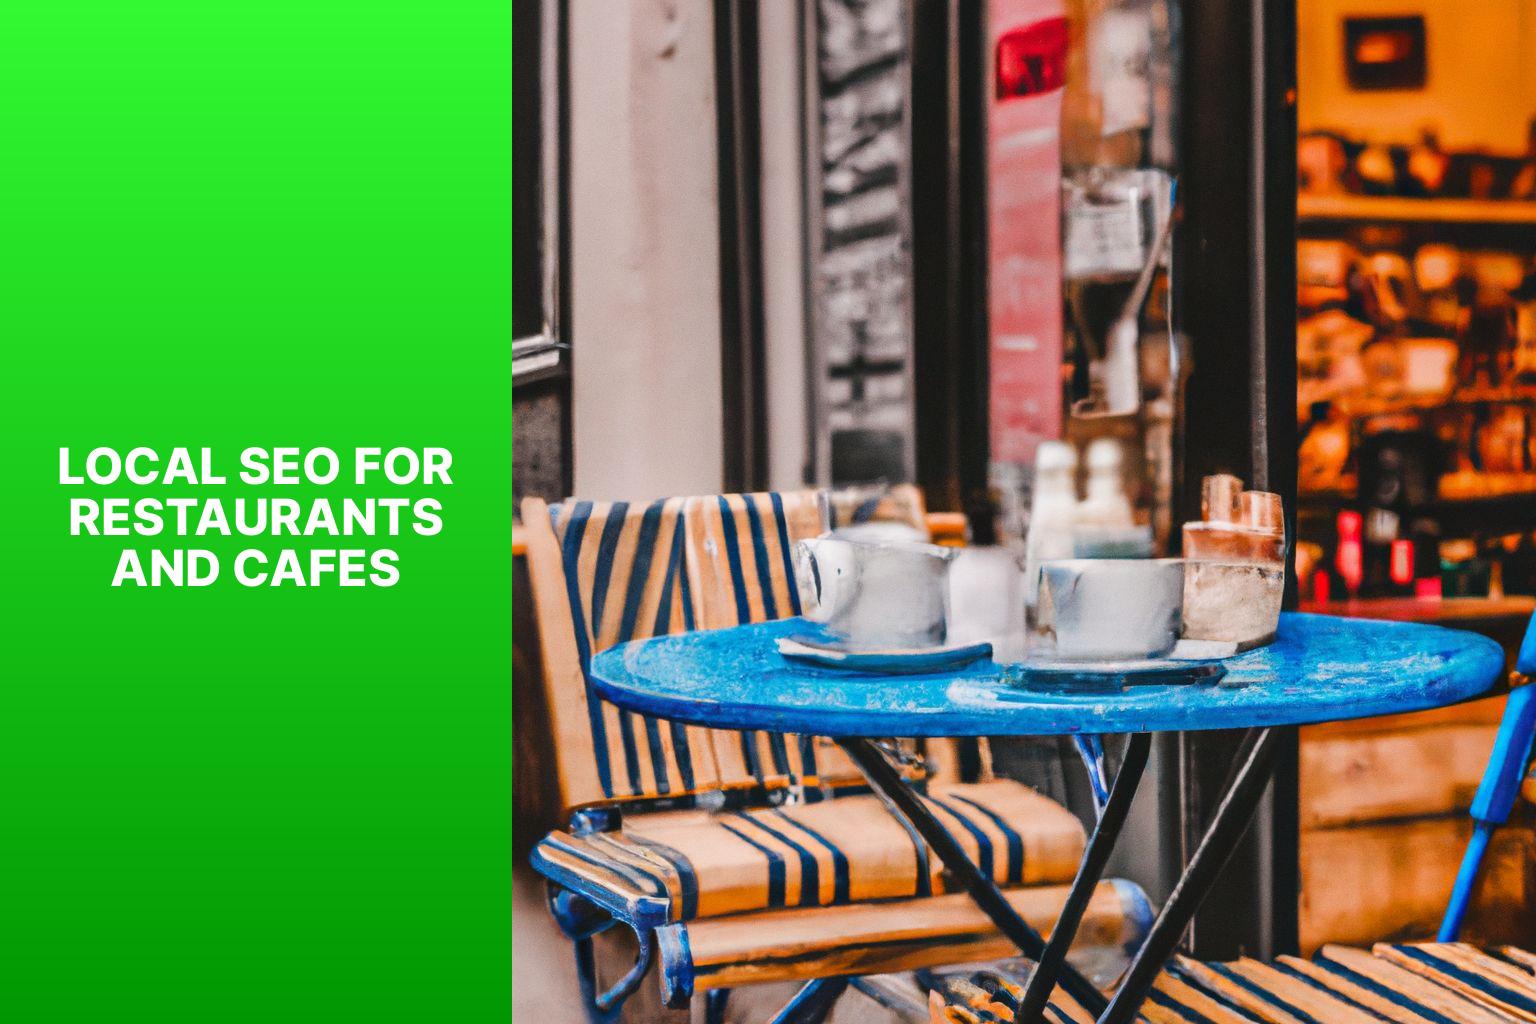 Local SEO for Restaurants and Cafes